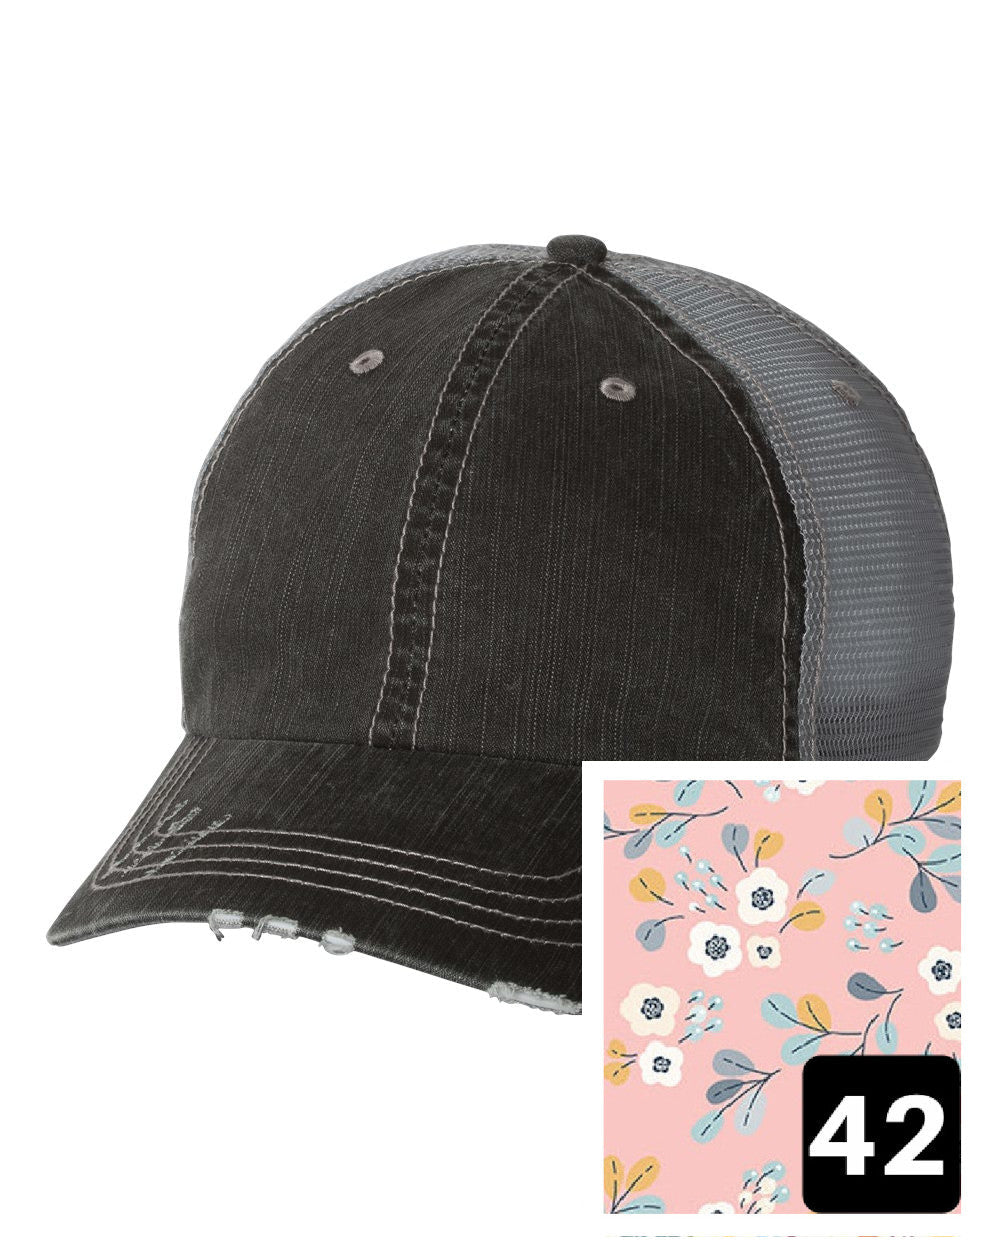 gray distressed trucker hat with light blue and pink mosaic fabric state of New York